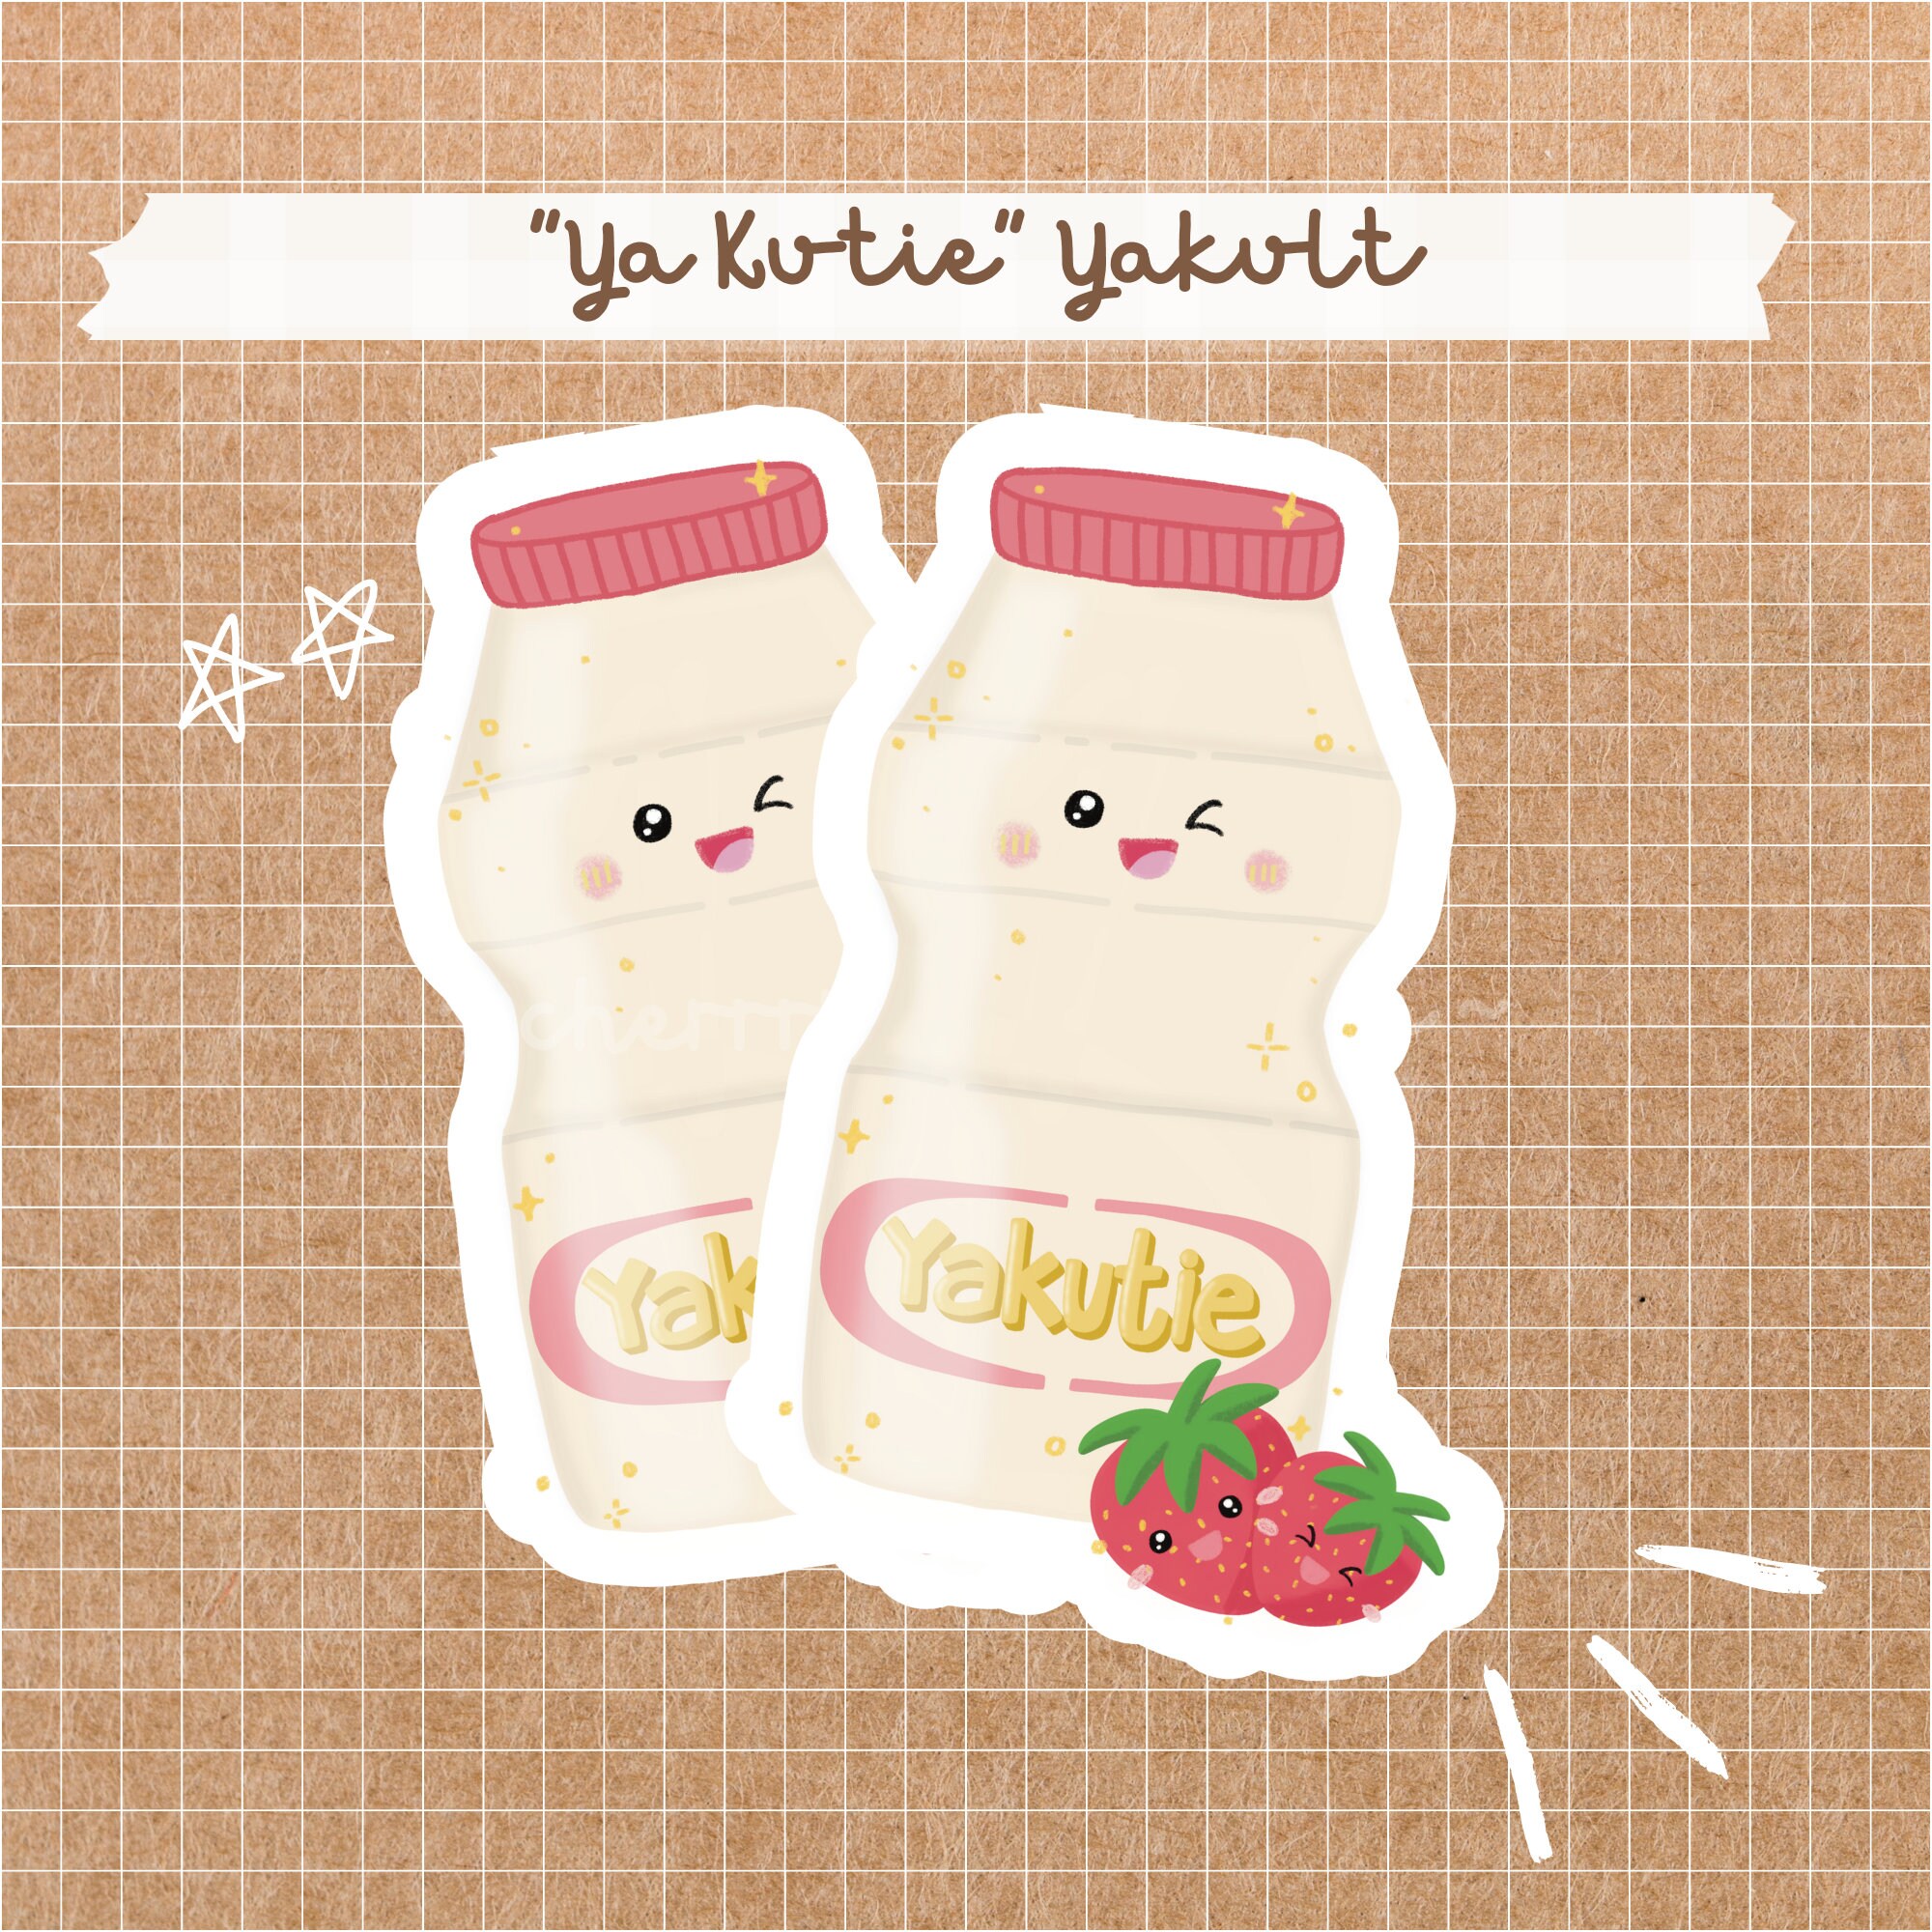 Is there any difference between the “Korean Yogurt Smoothie” and our Yakult  in the Philippines? – Gia Allana